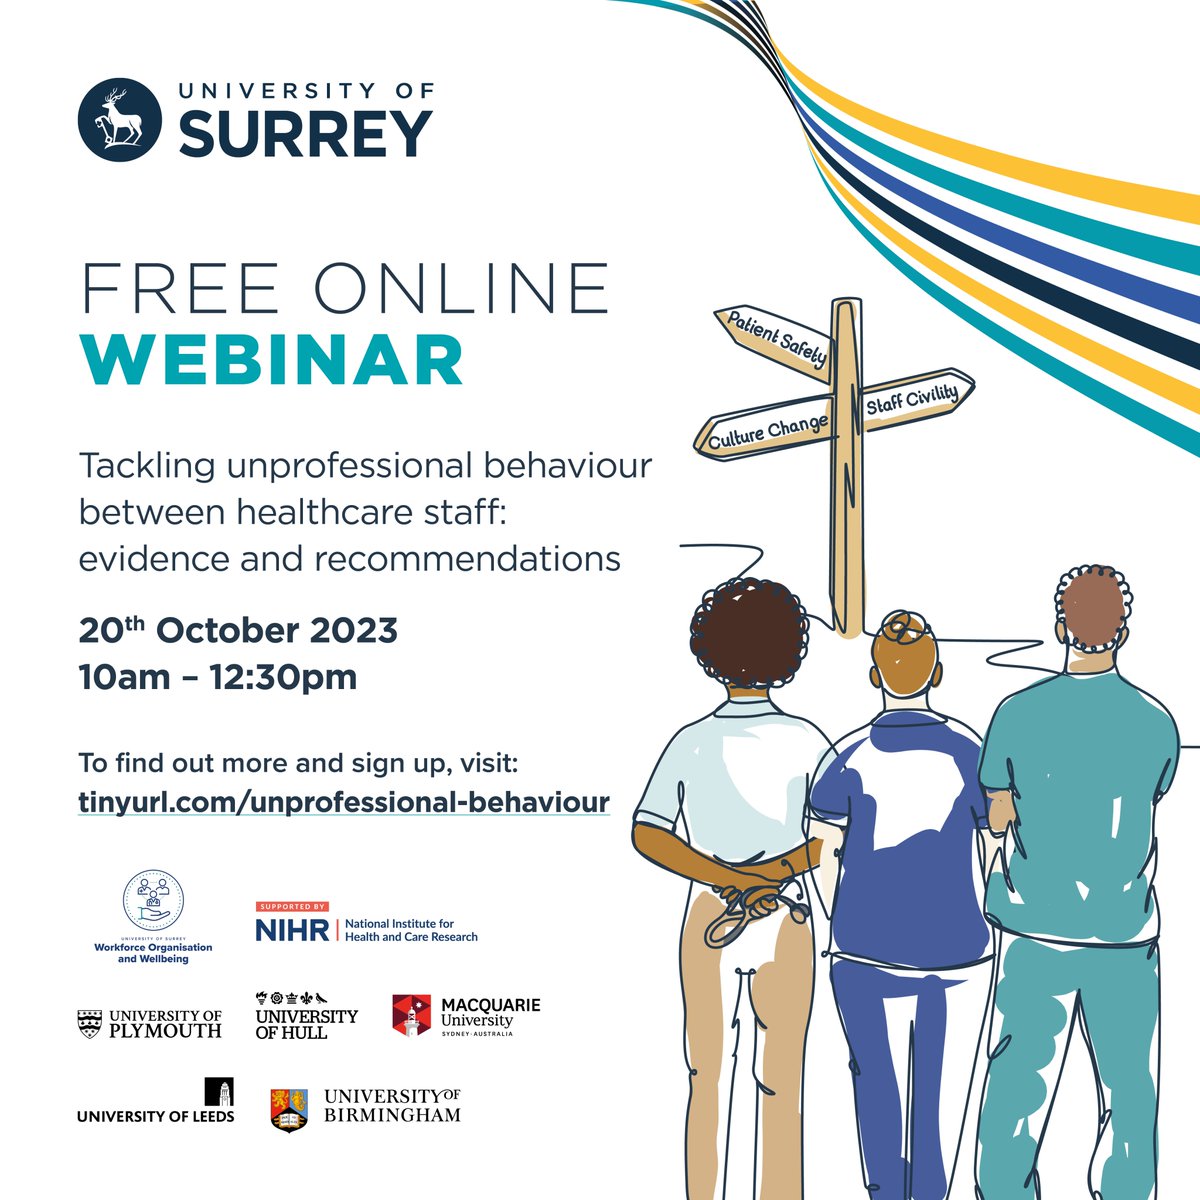 Our free online event to launch guidance on addressing unprofessional behaviours between healthcare staff is fast approaching (Oct 20th)! Sign up here: tinyurl.com/unprofessional… @_HSMCentre @AIHI_MQ @LeedsHealthcare @PHealthCareRes @HullYorkMed @wpsms_org